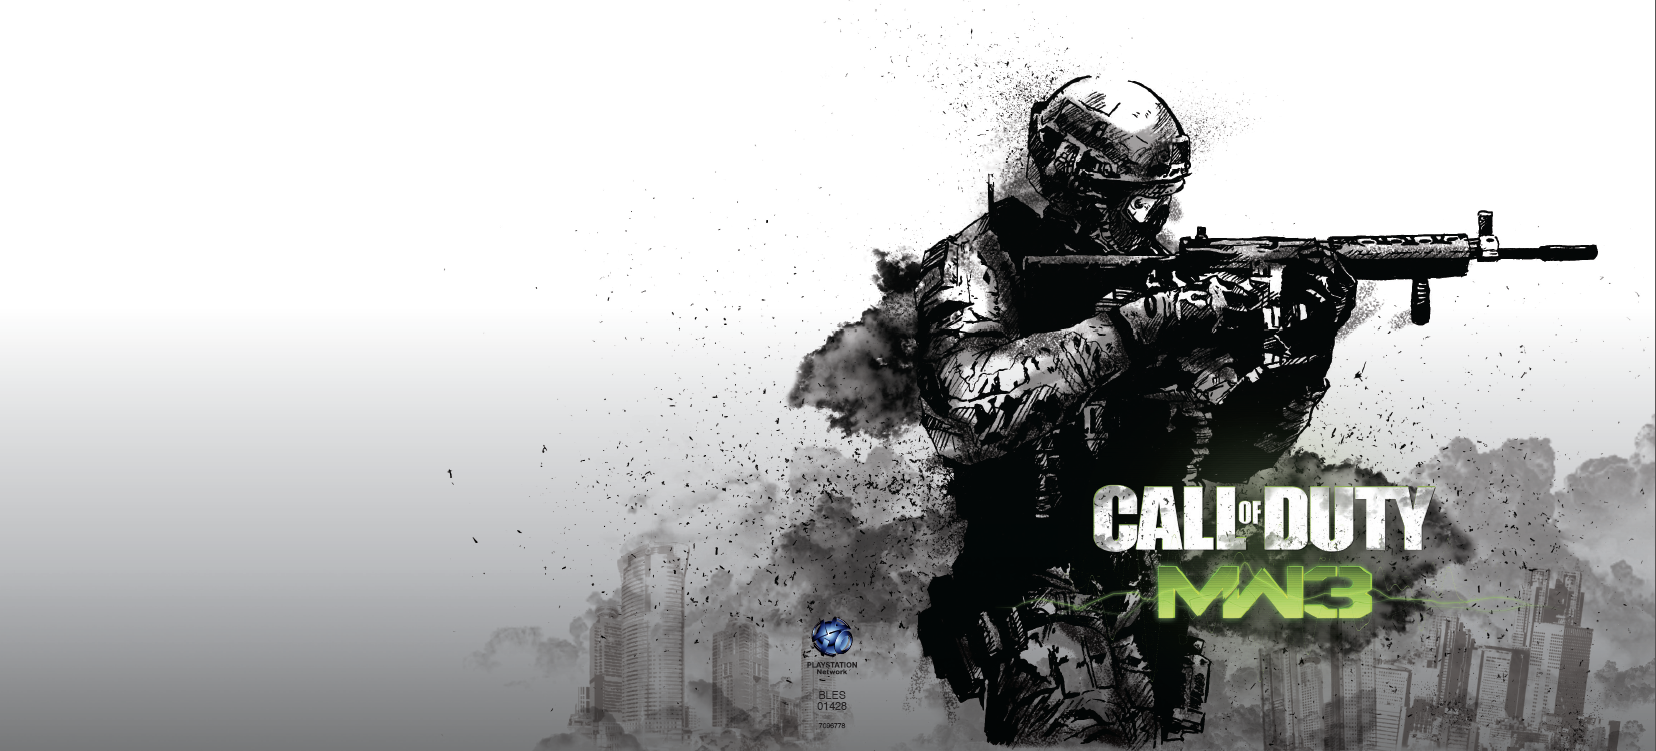 mw3 wallpaper,games,soldier,personal protective equipment,pc game,shooter game